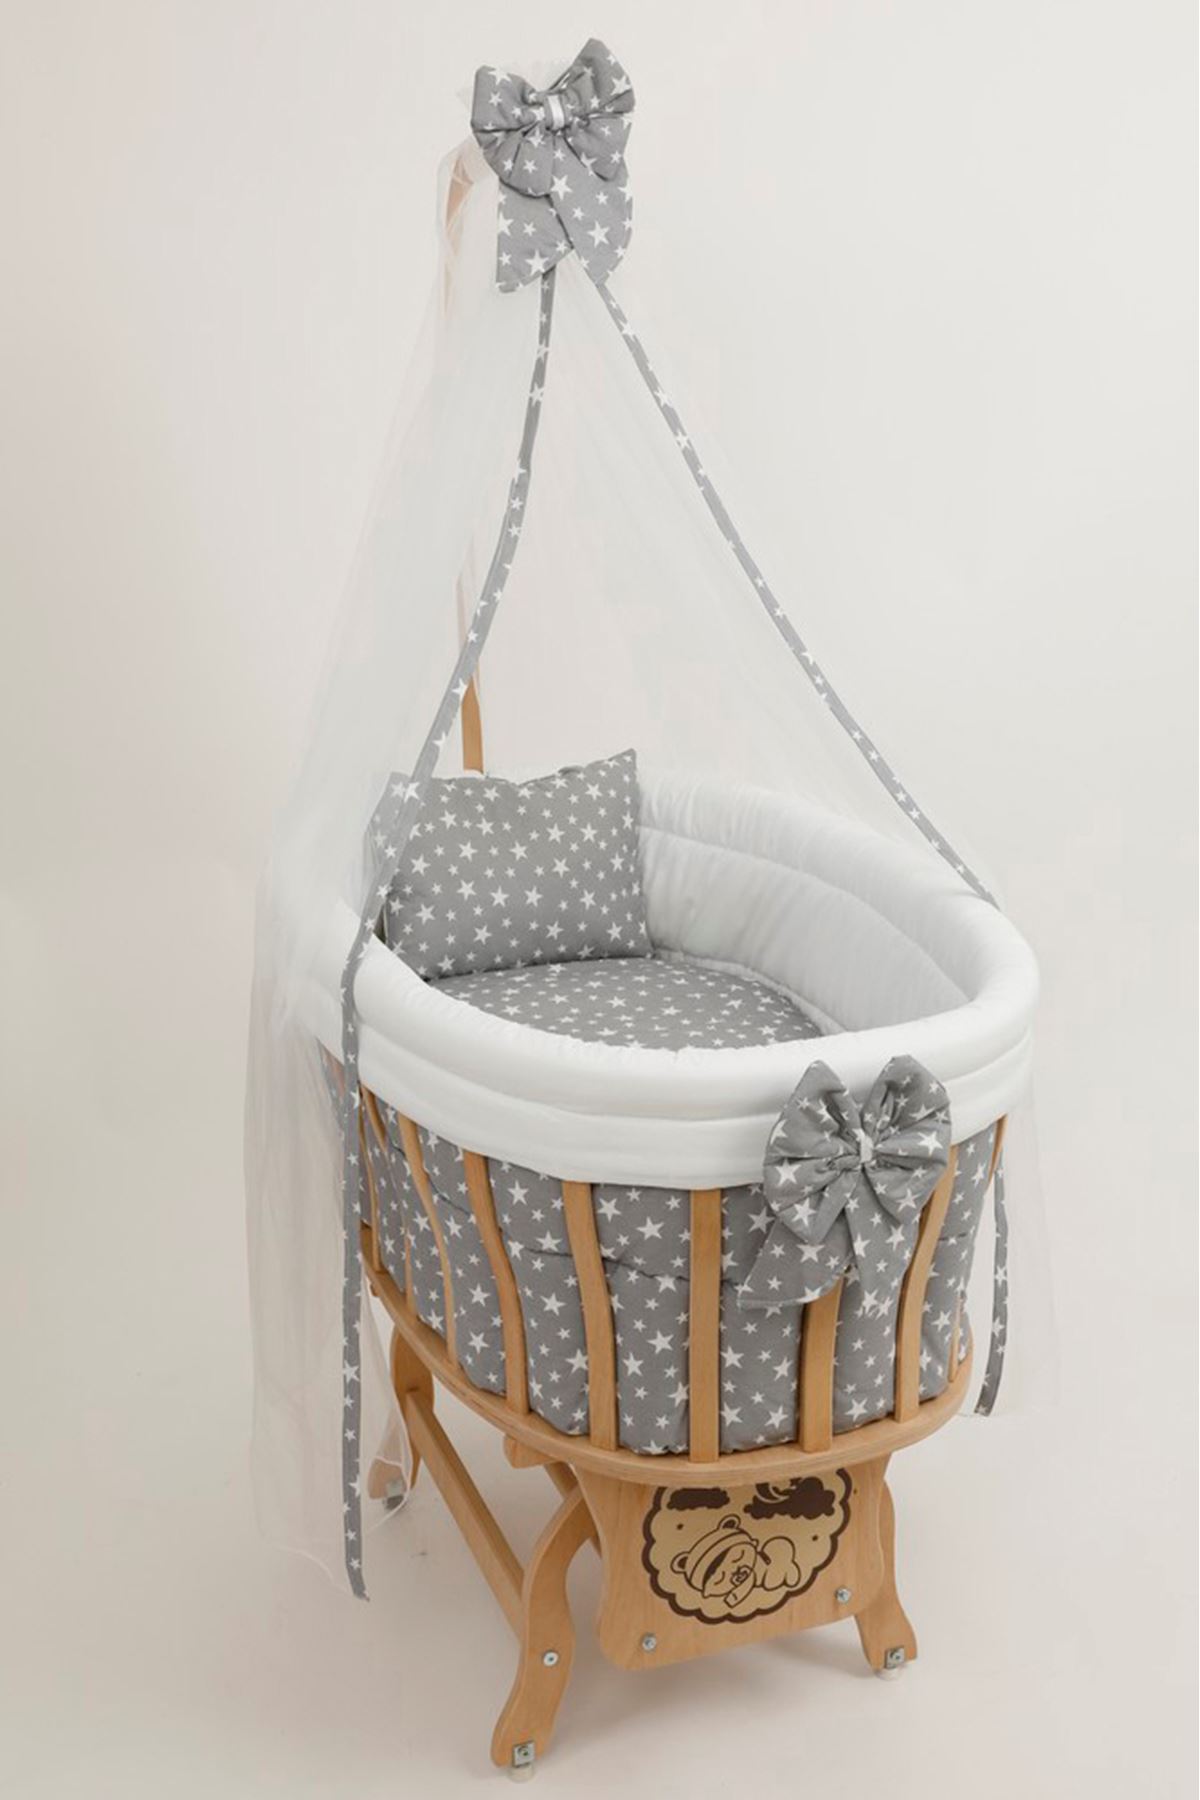 Wooden Basket Cradle With "Gray Star" Set